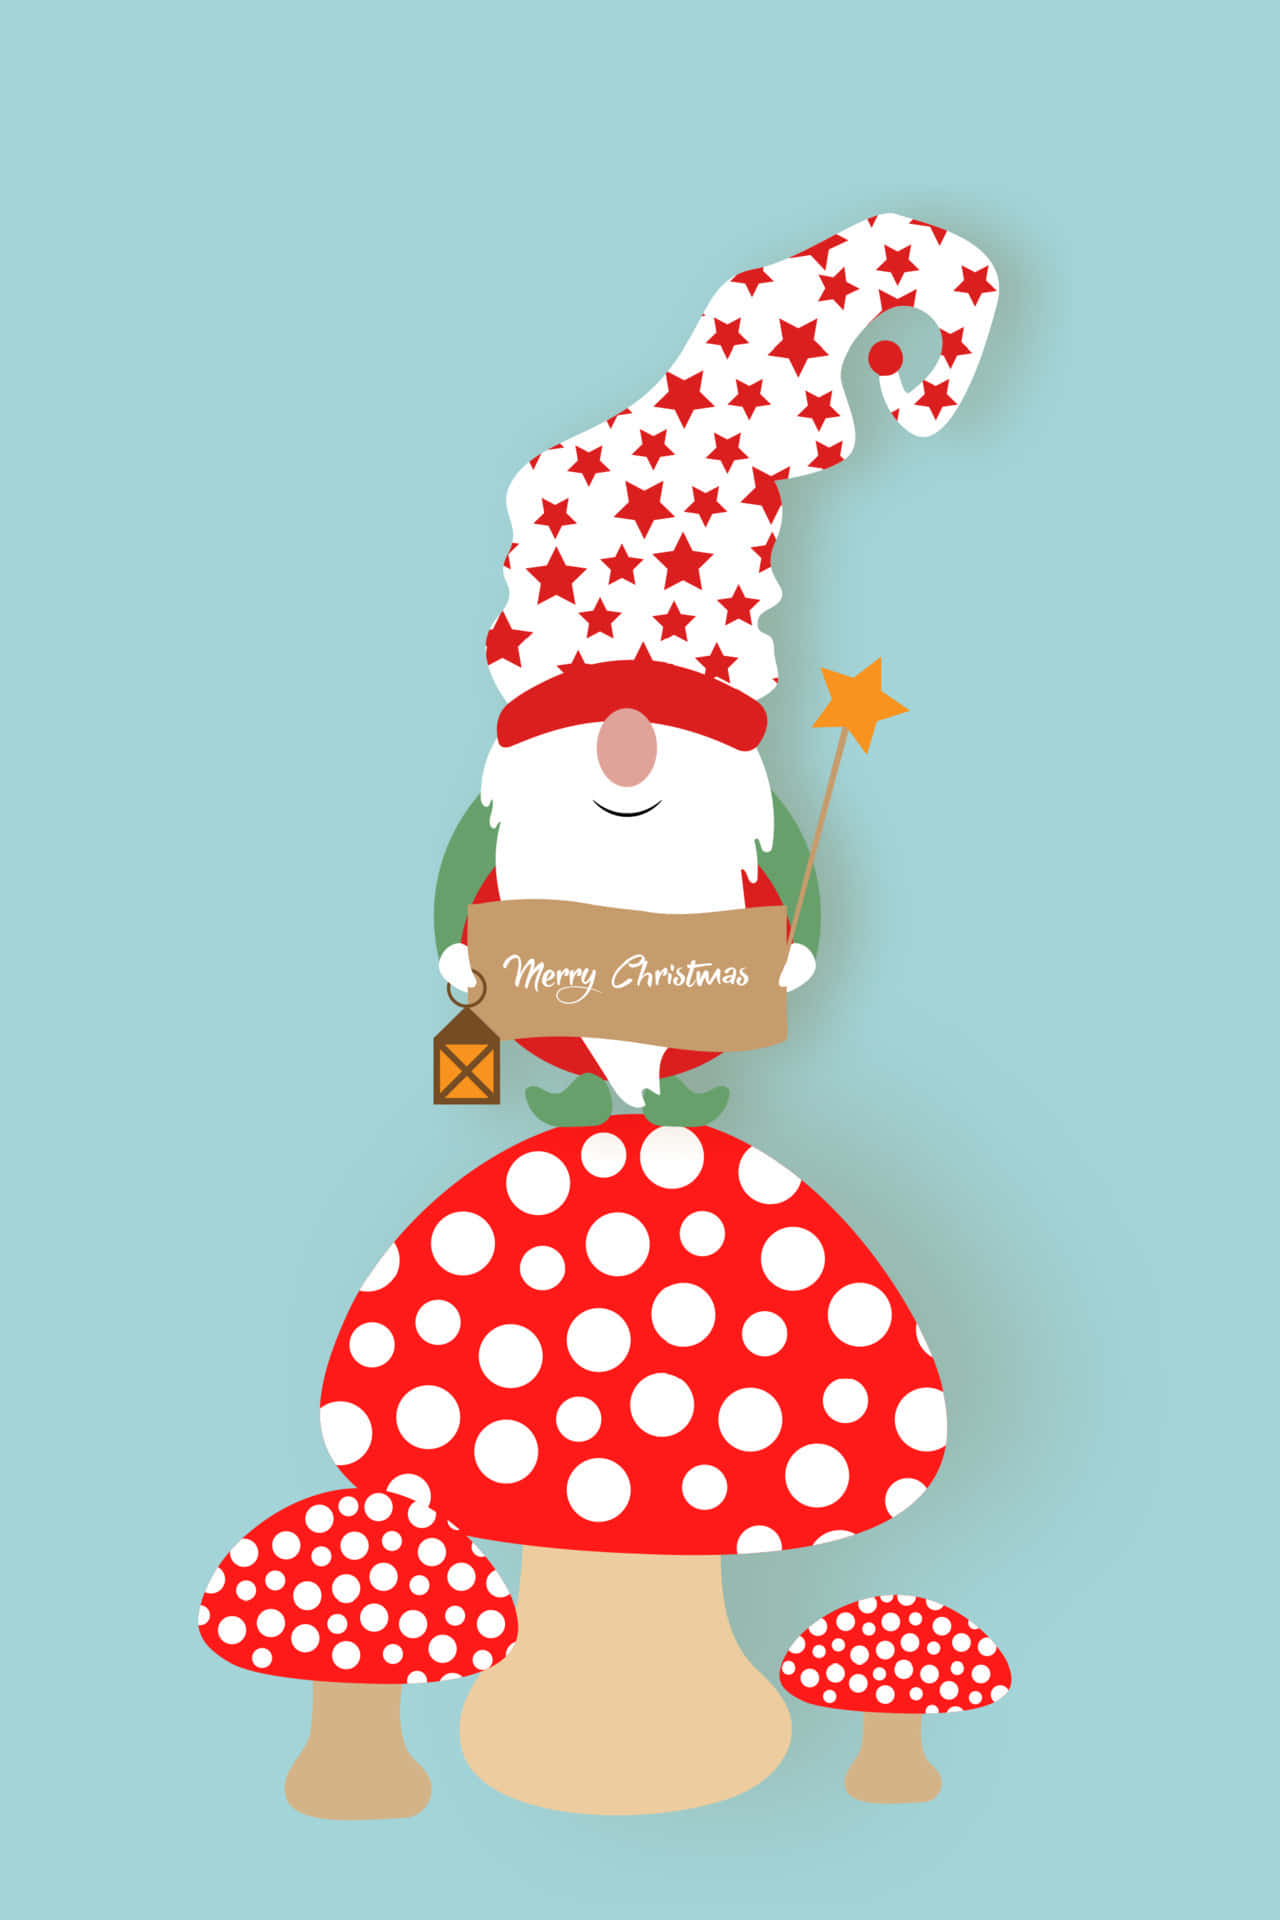 “Enjoy More Holiday Cheer With a Christmas Gnome” Wallpaper